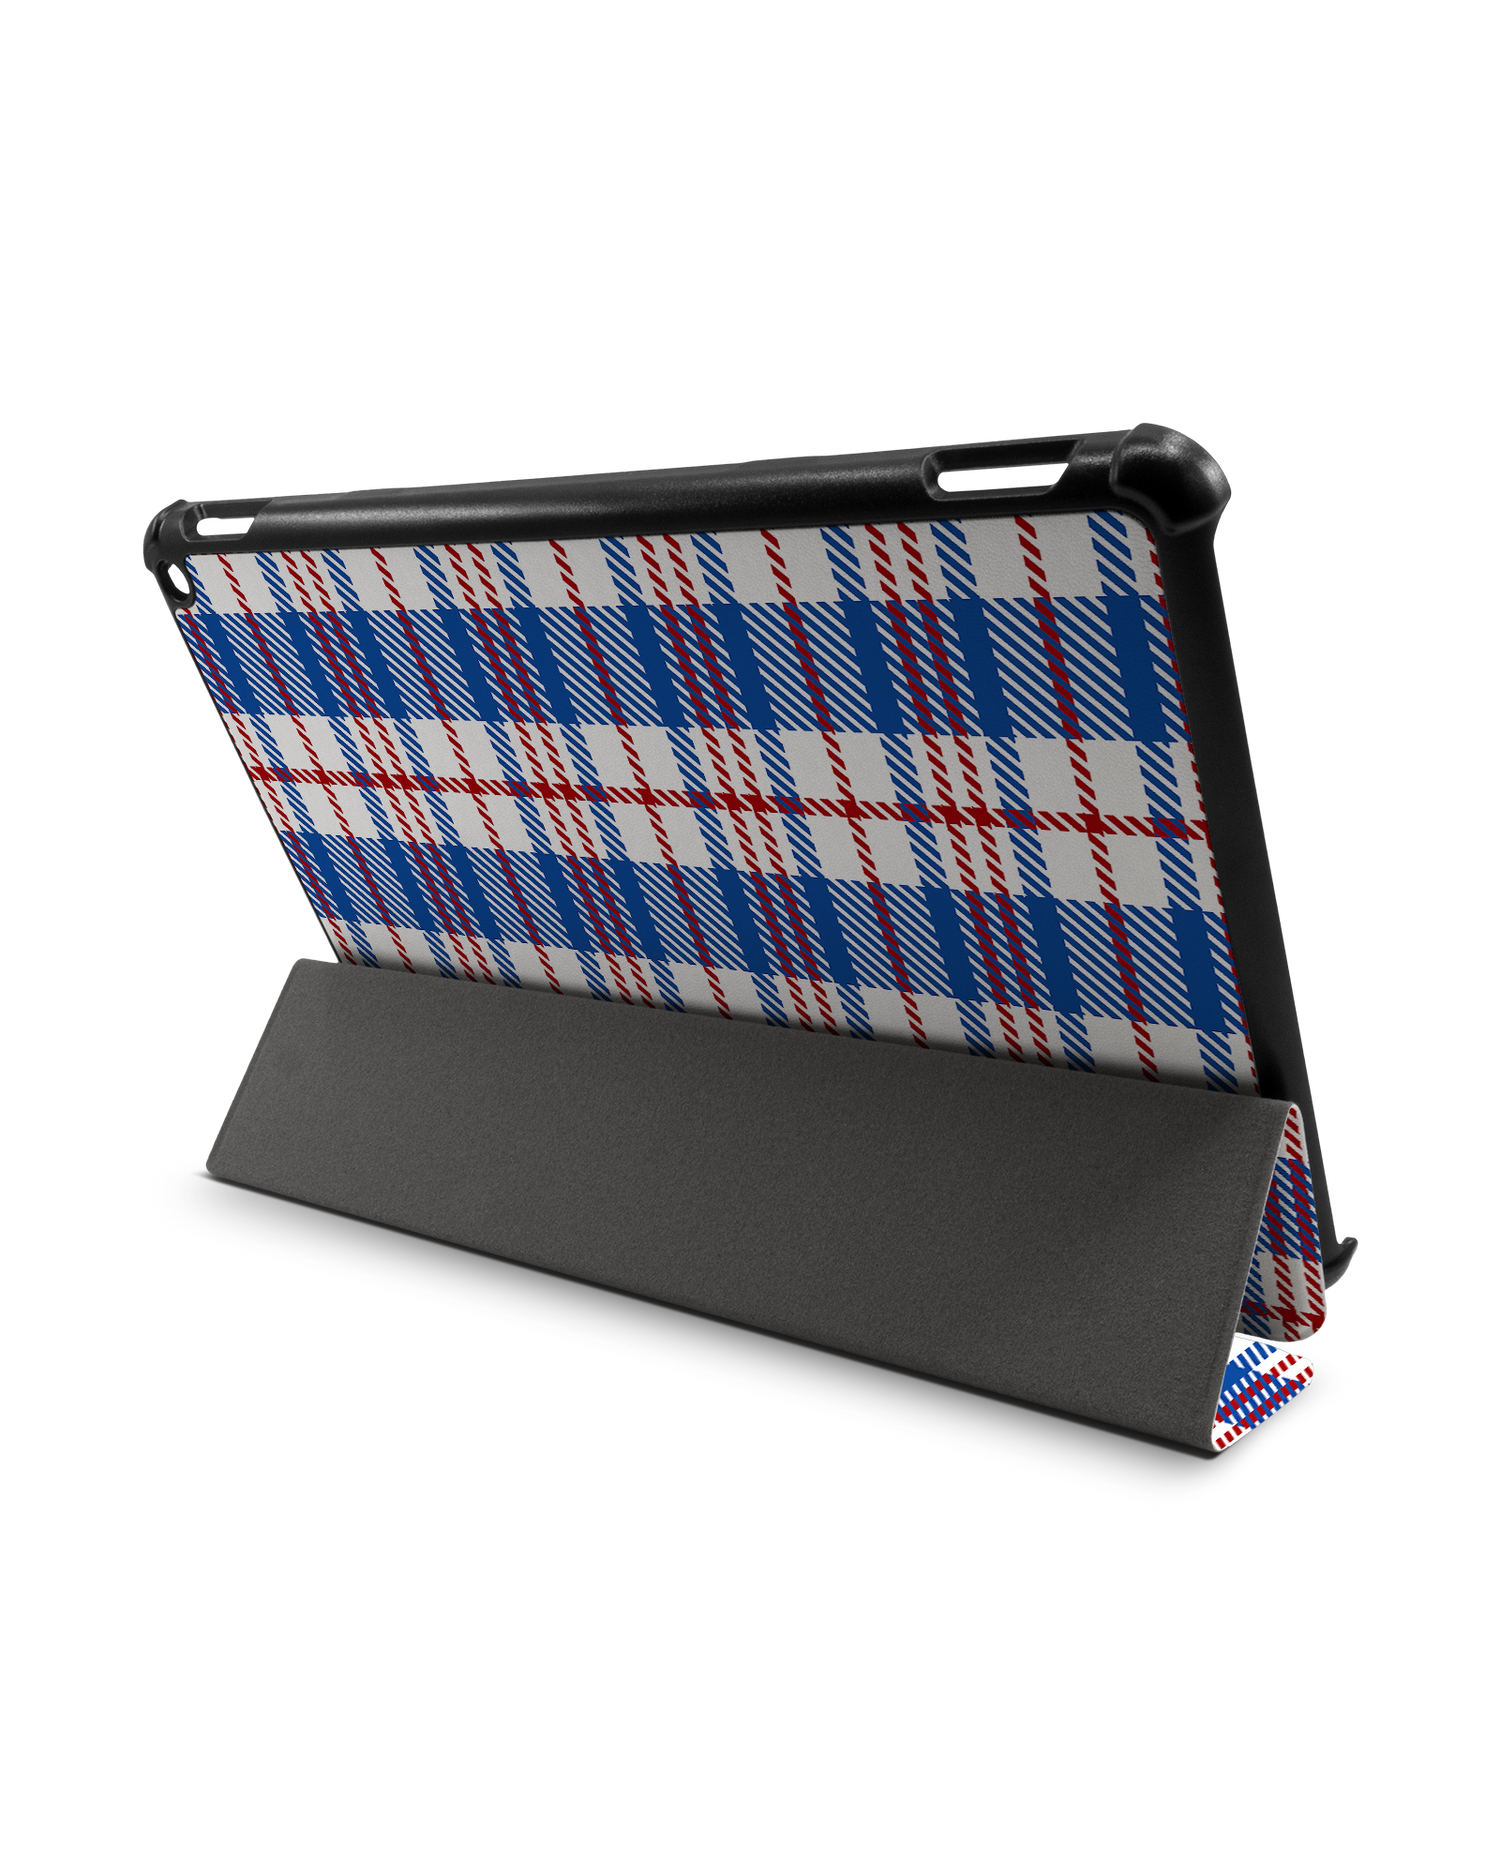 Plaid Market Bag Tablet Smart Case for Amazon Fire HD 10 (2021): Used as Stand